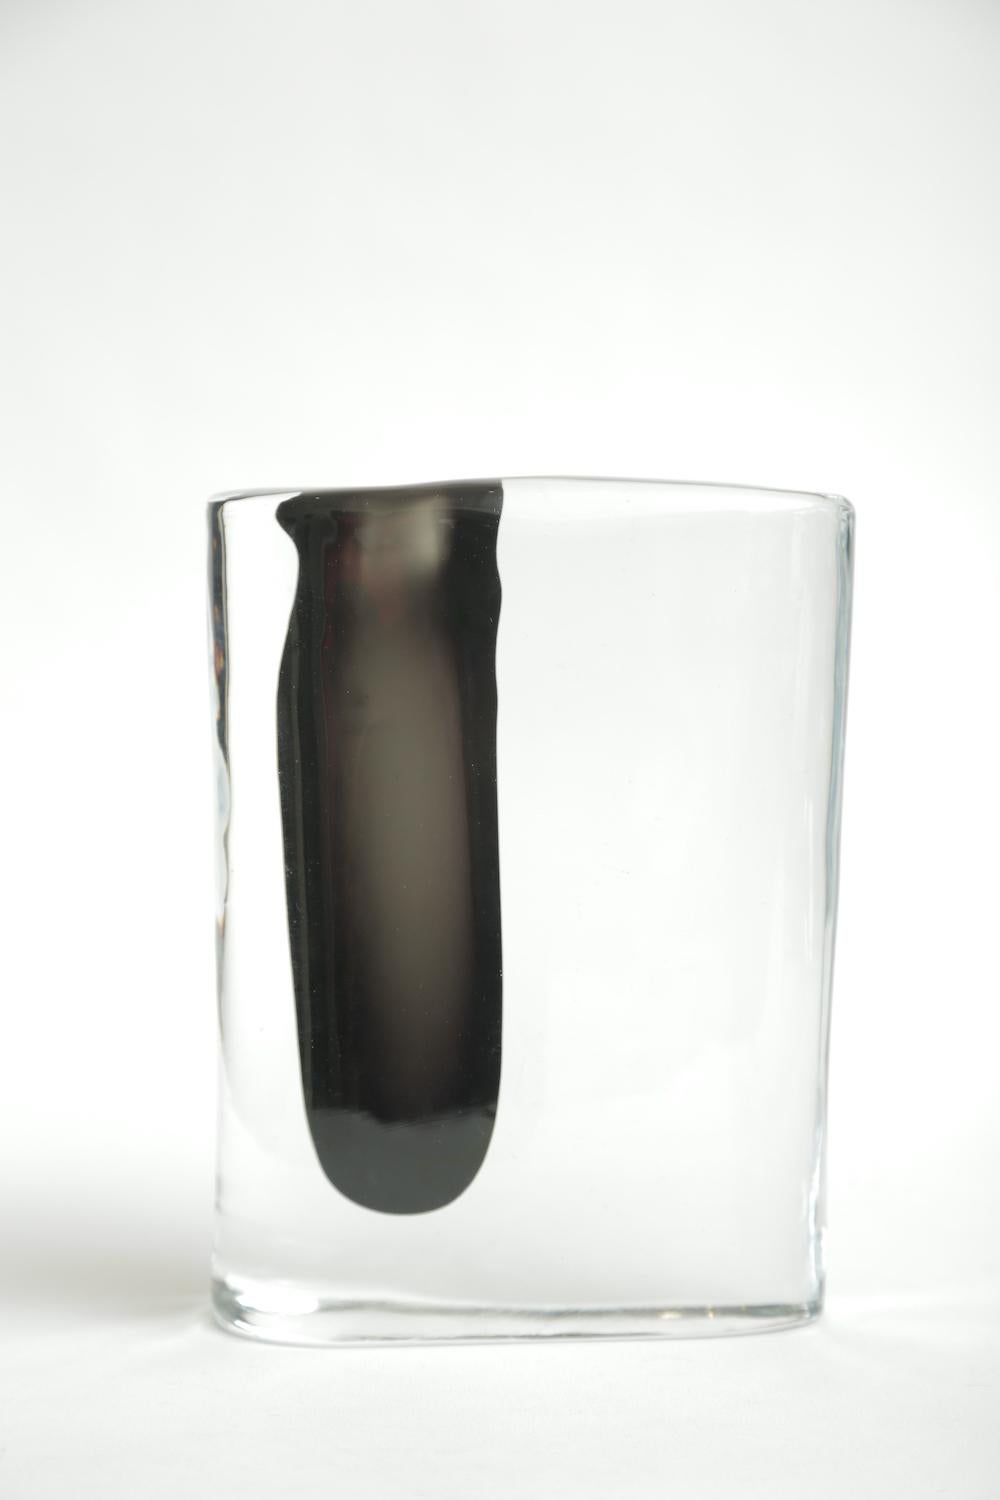 European Cenedese Murano Black and Clear Glass Vase Vintage